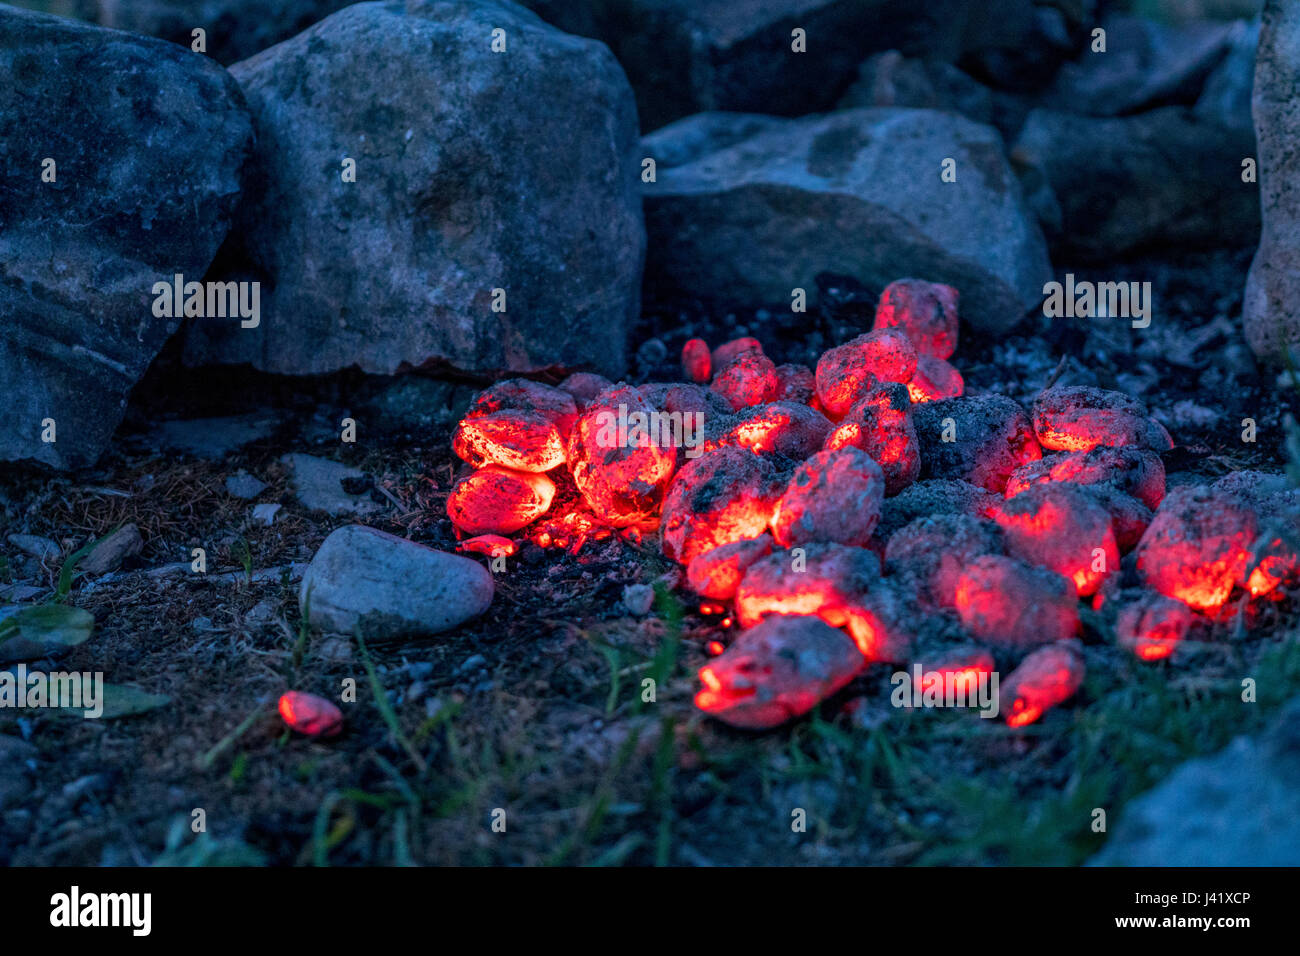 BBQ Grill Pit With Glowing And Flaming Hot Charcoal Briquettes Stock Photo